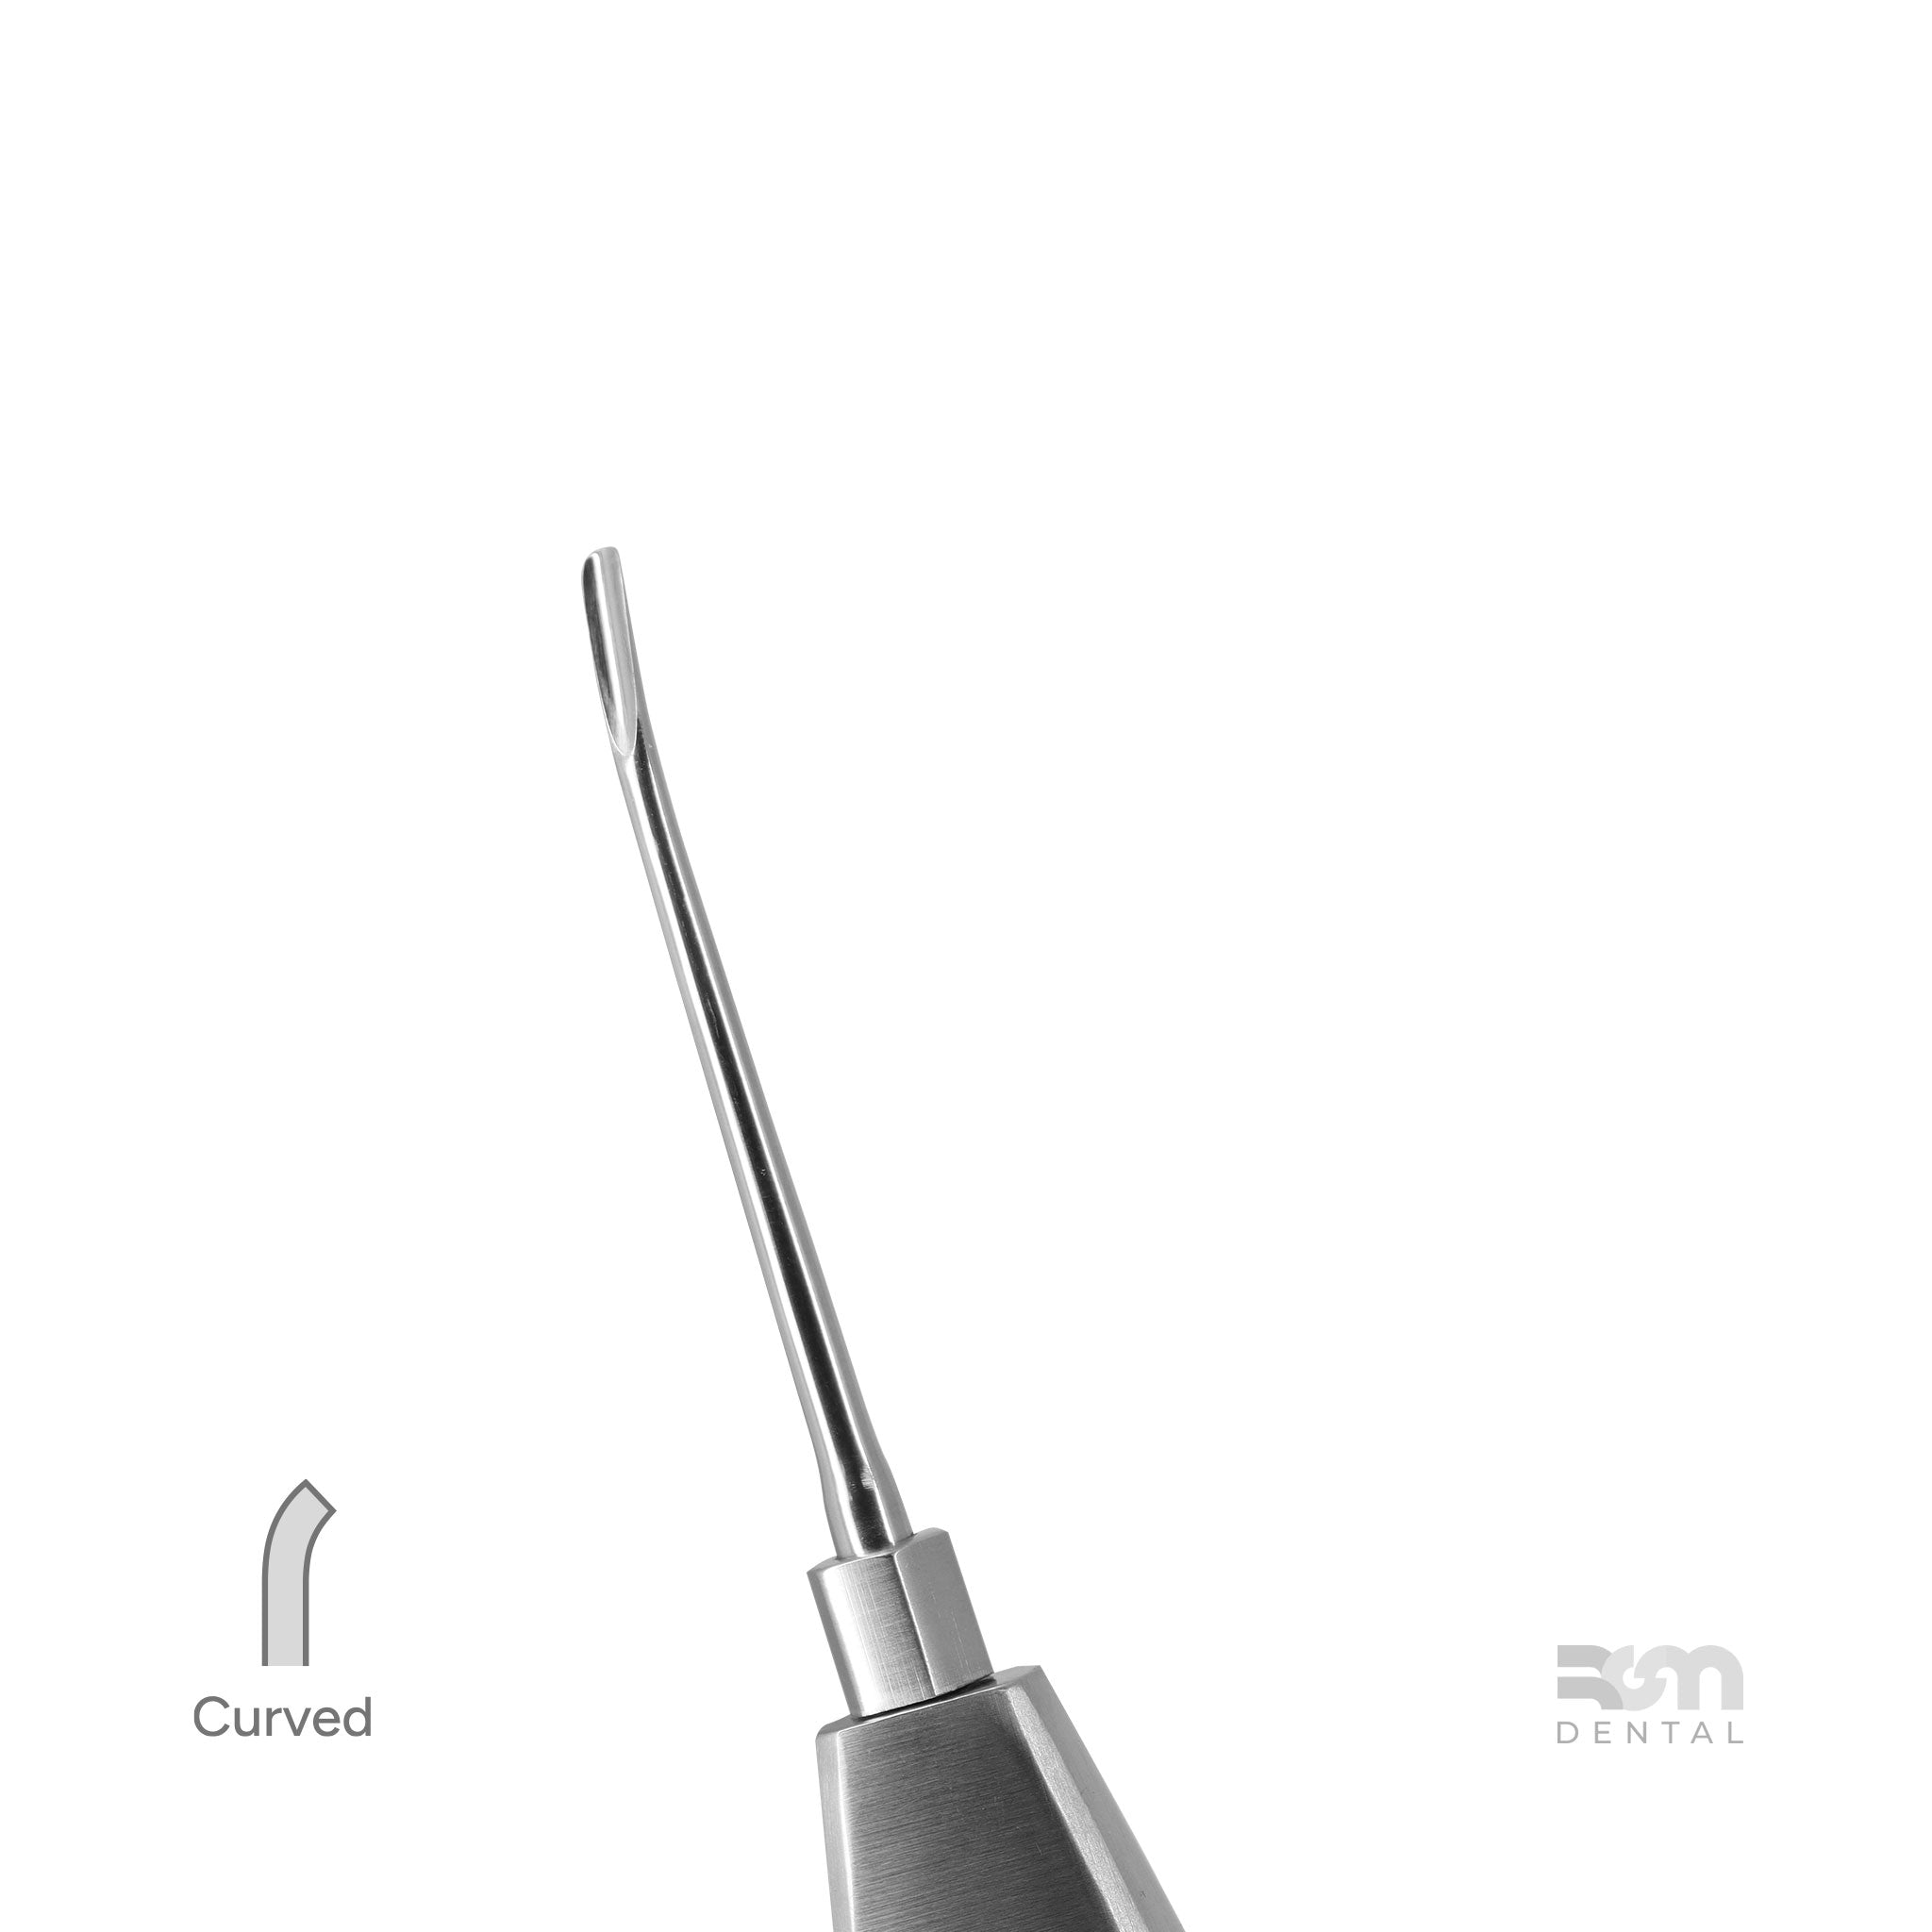 Luxator LUX-08 : Curved 3.0mm